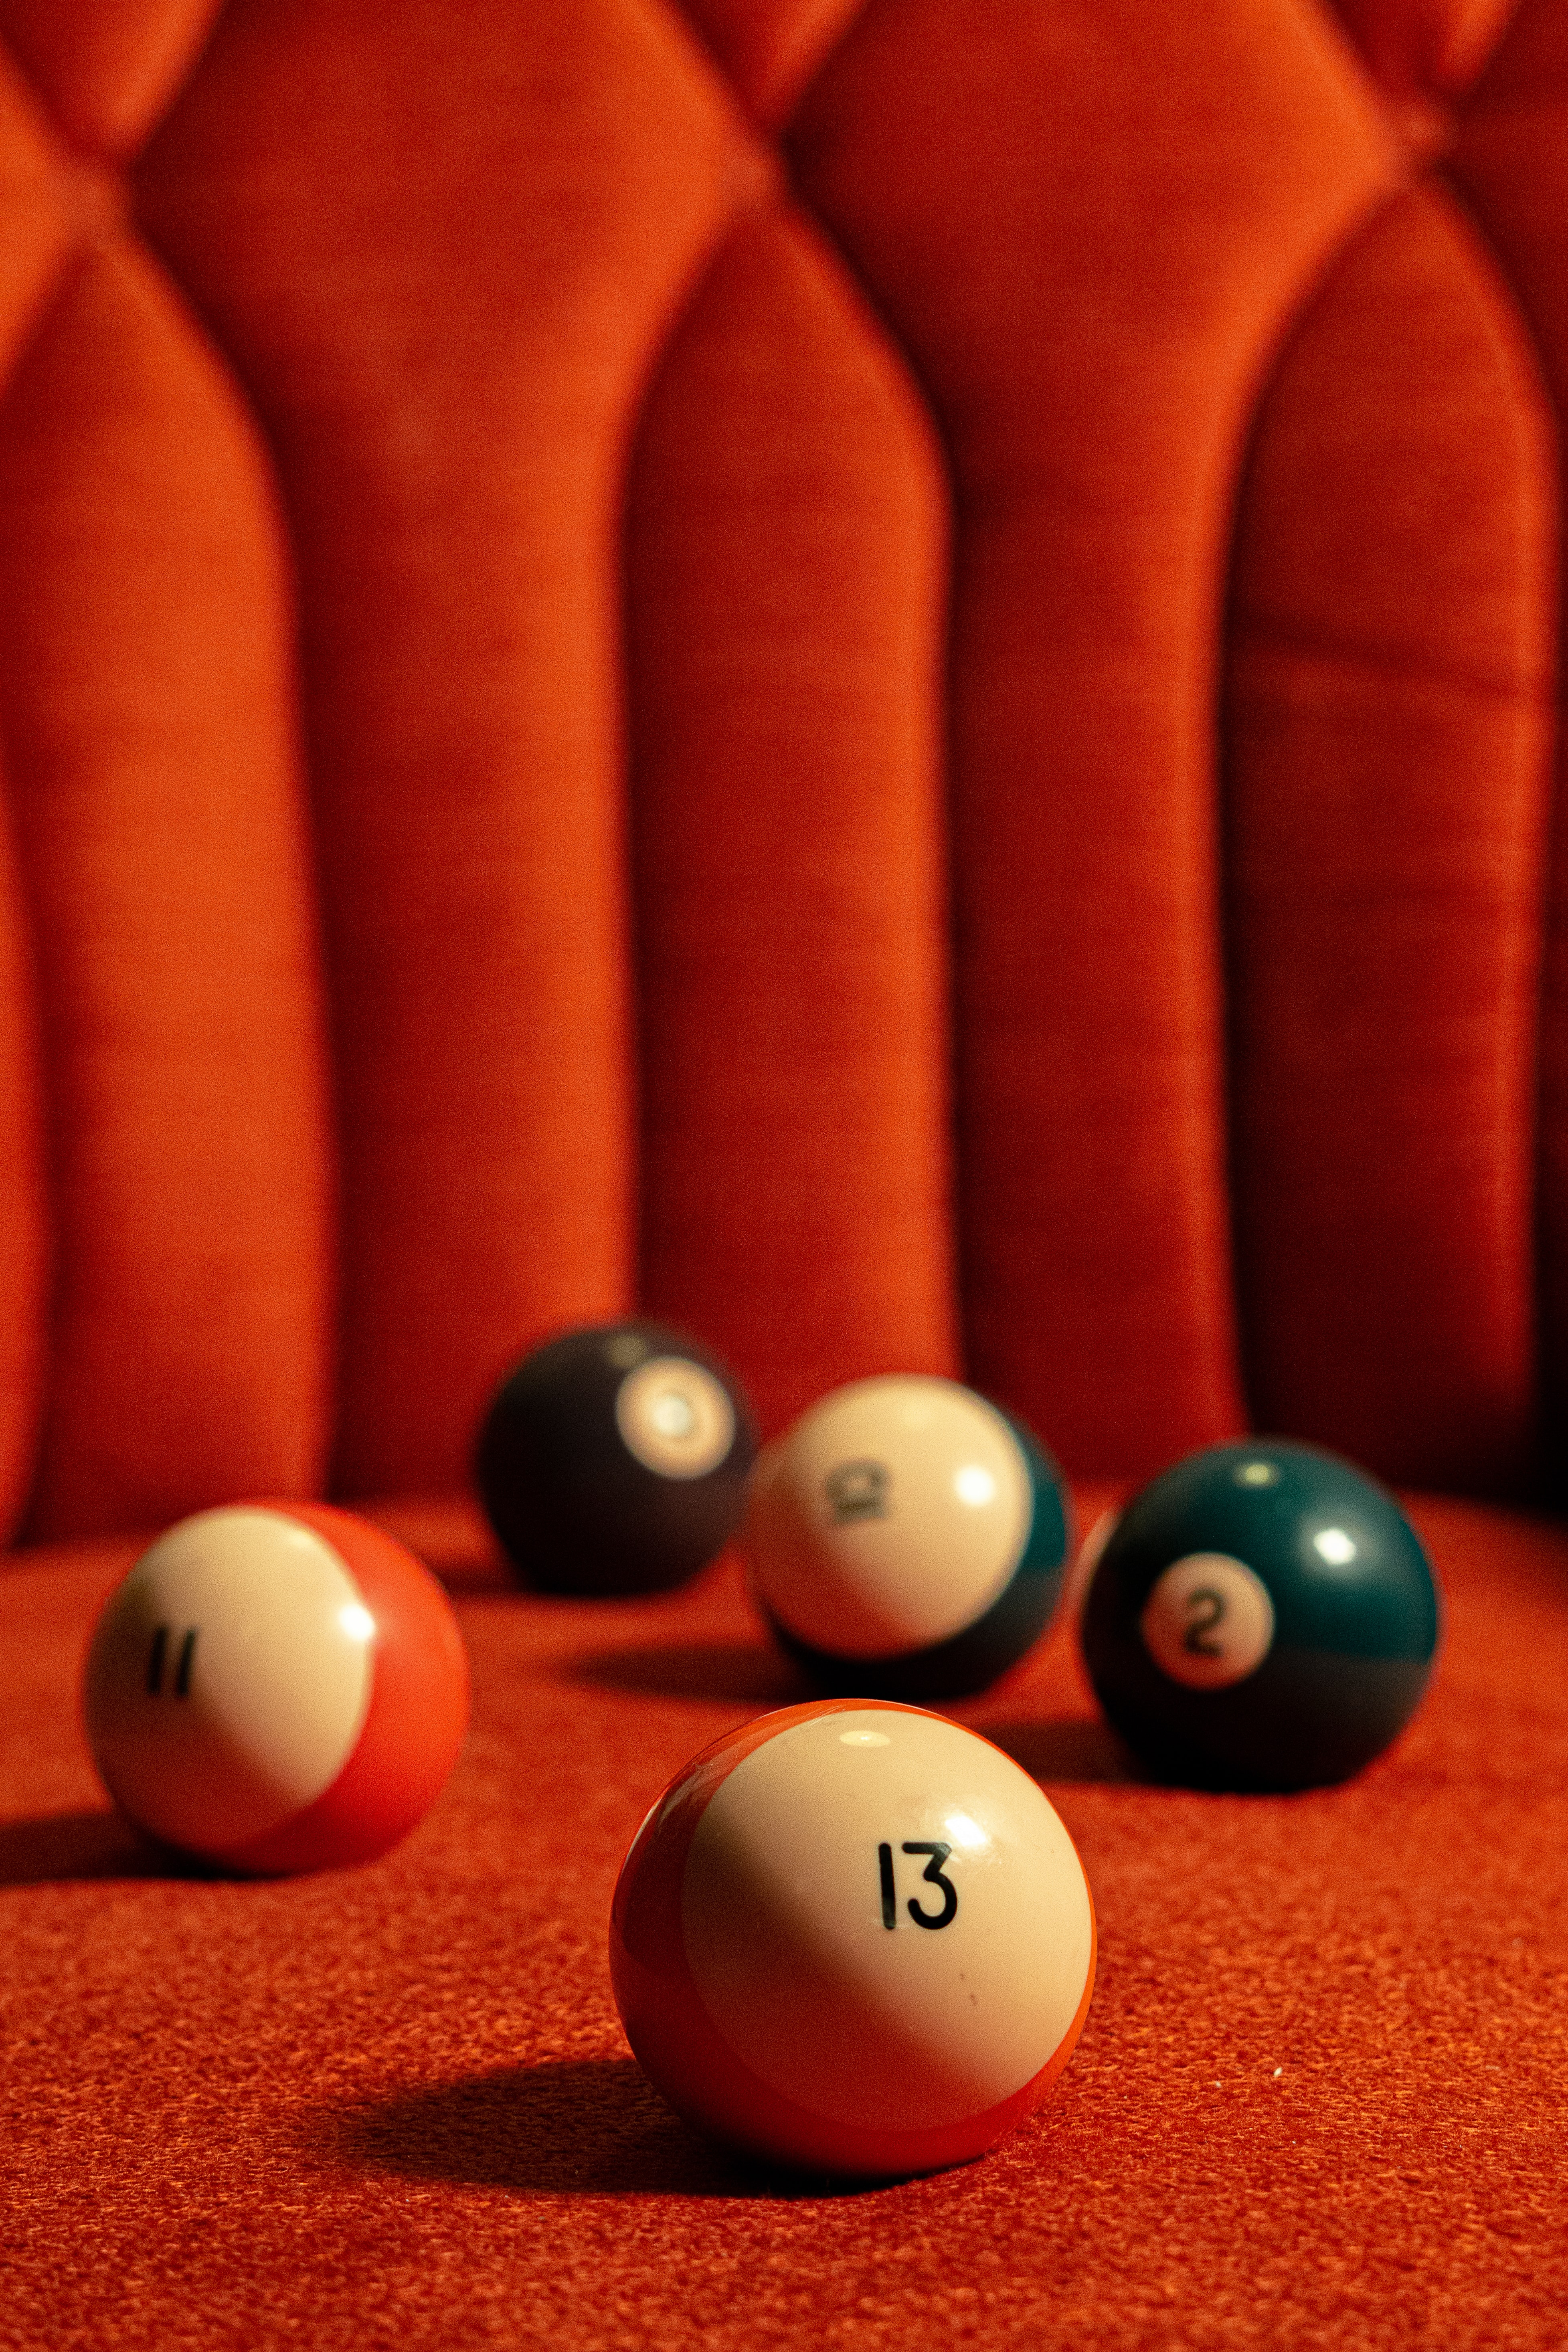 81472 Screensavers and Wallpapers Numbers for phone. Download billiards, miscellanea, miscellaneous, balls, numbers, billiard balls pictures for free